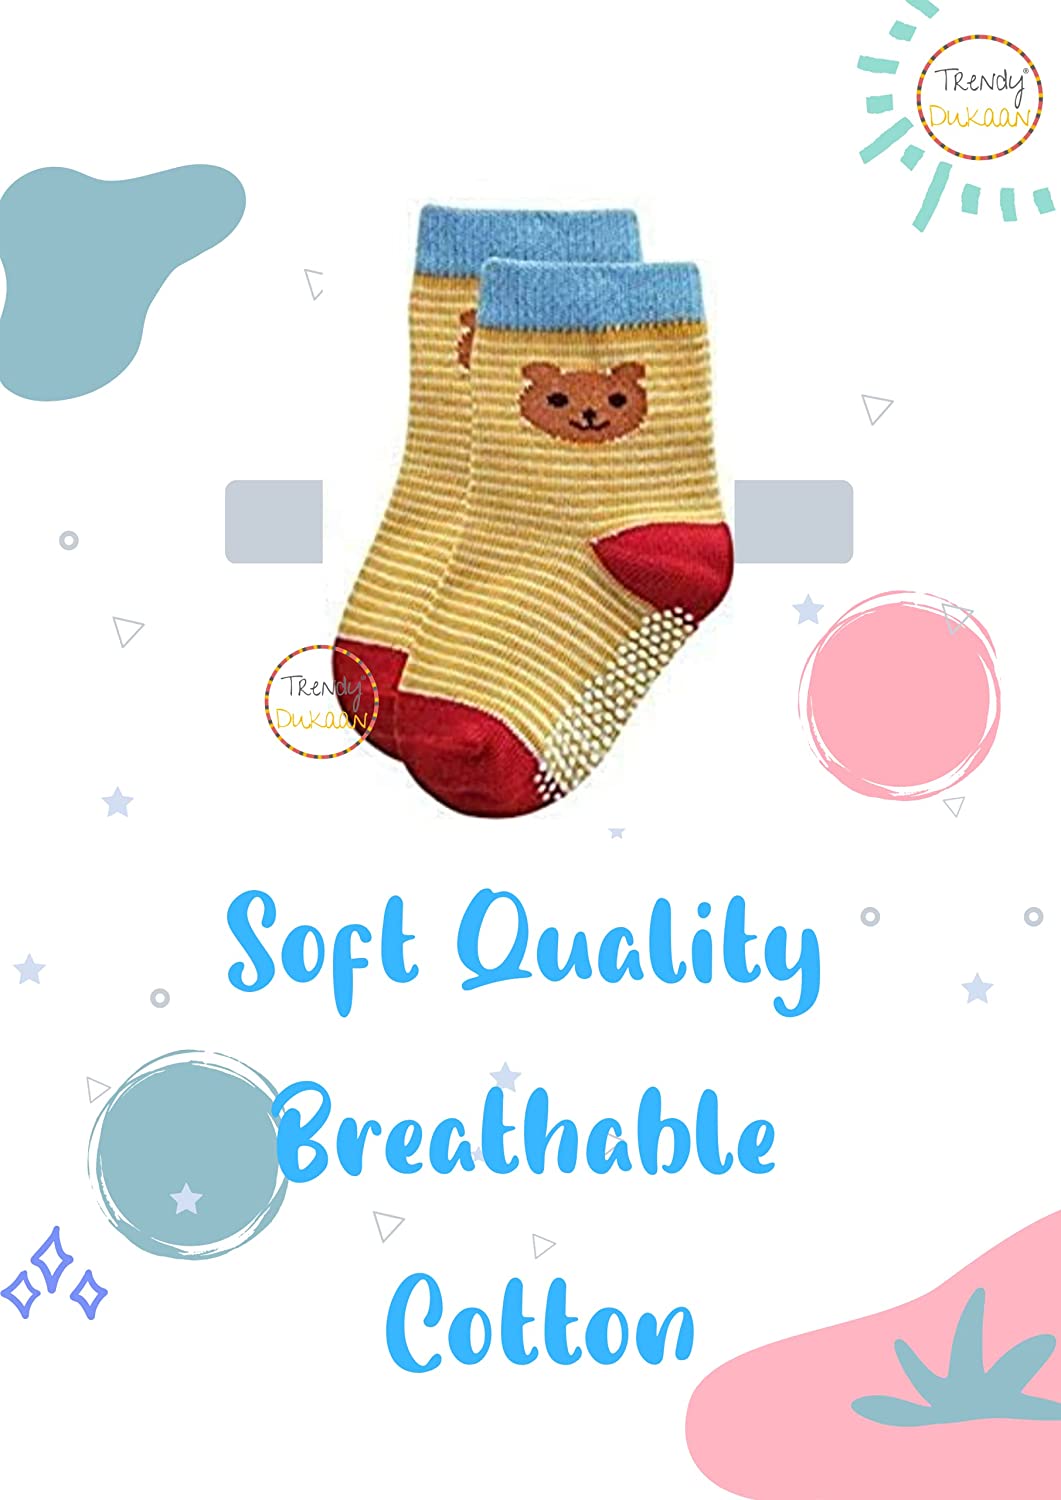 naughty baby cotton socks for new born, 6 months to 12 month old